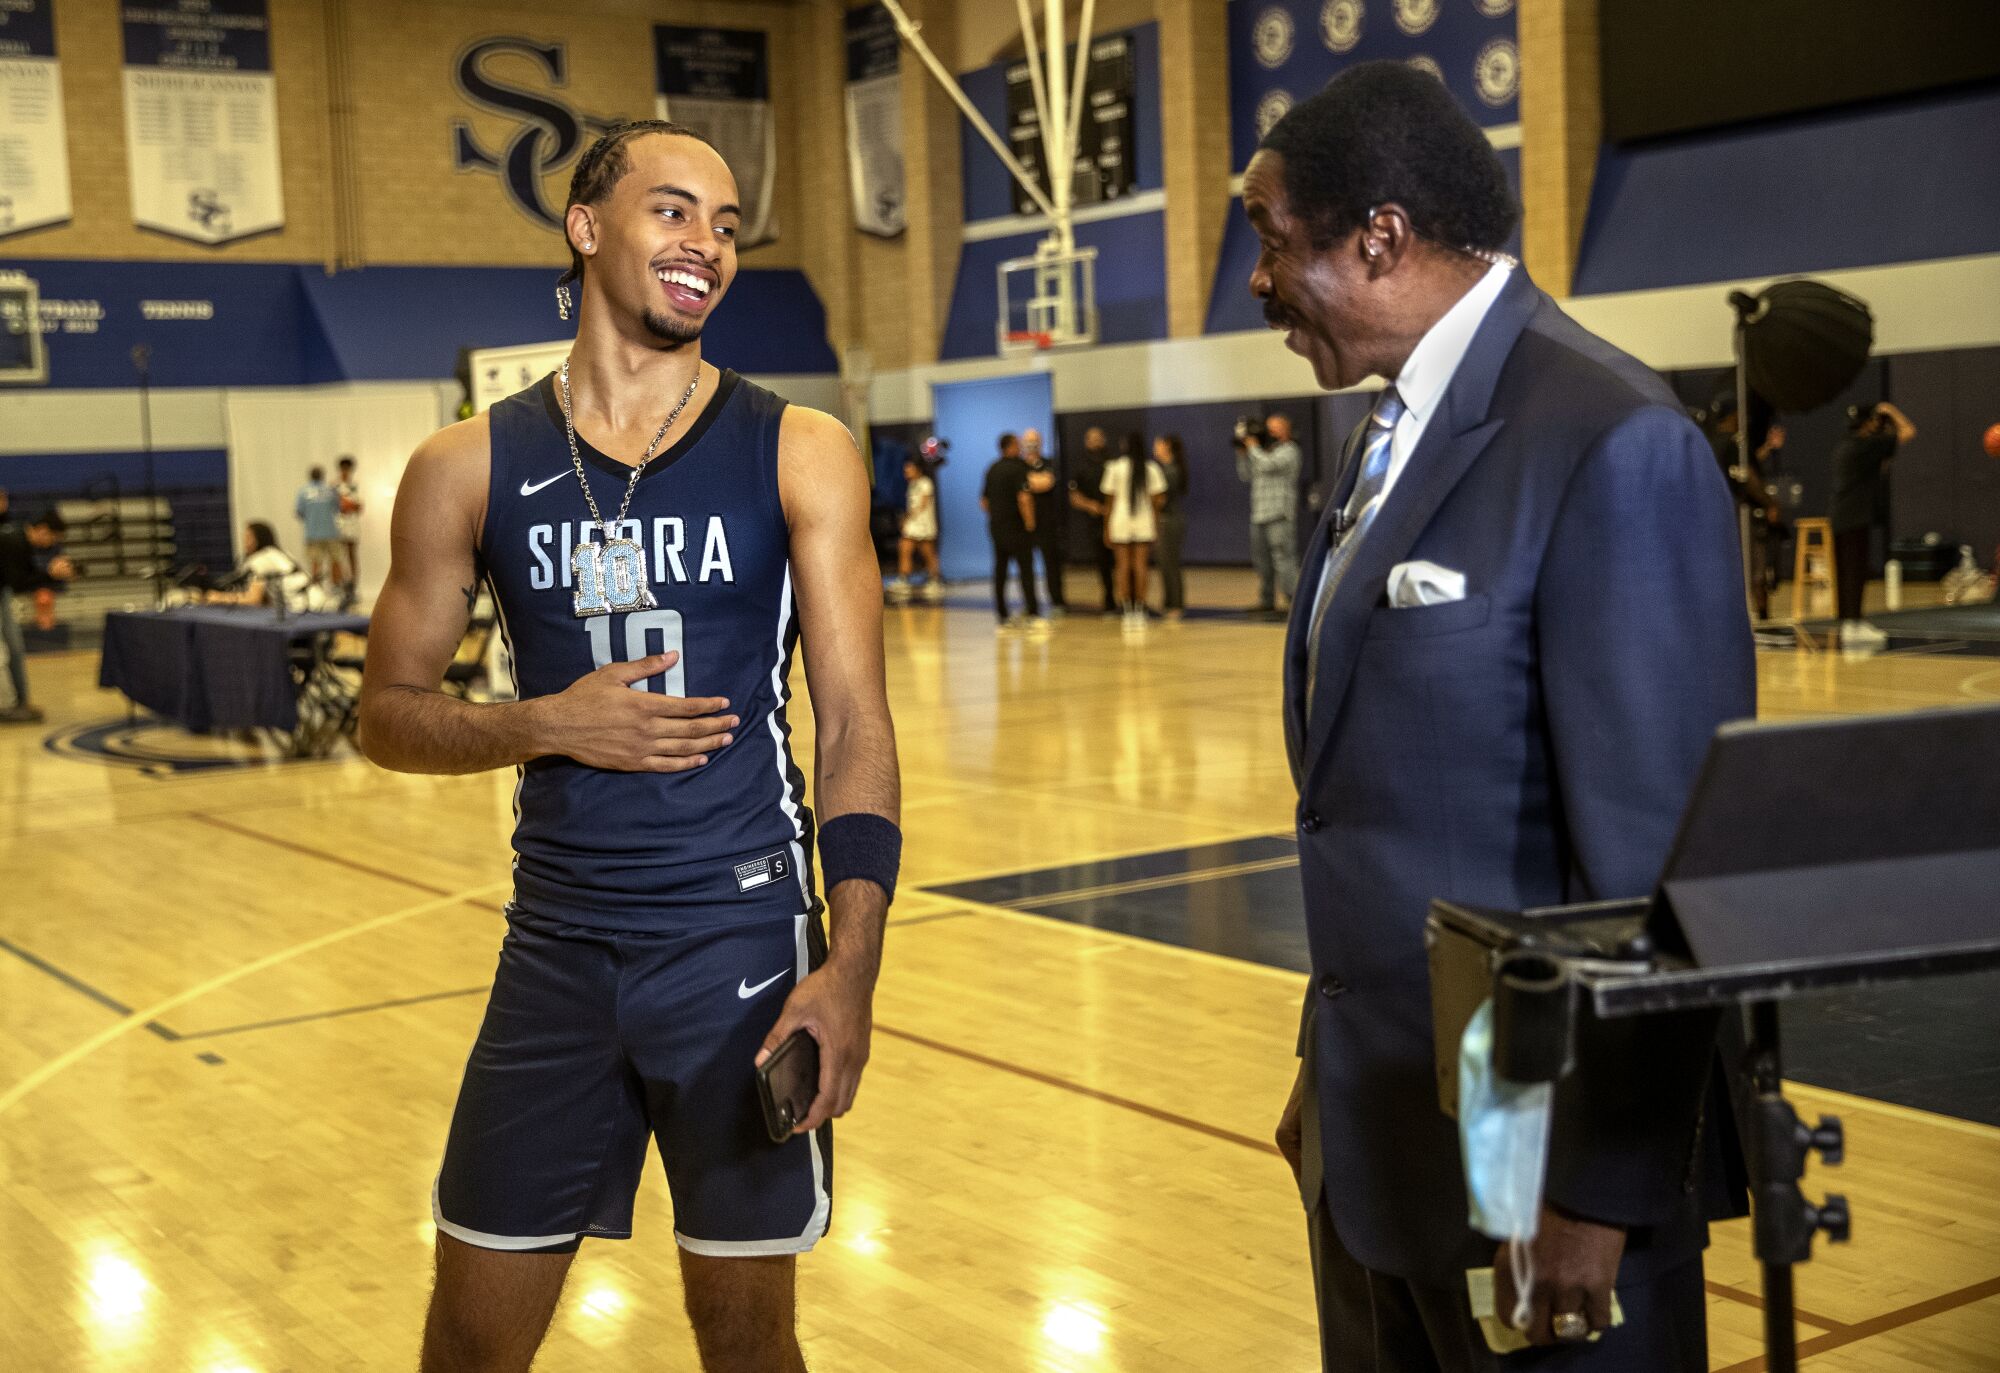 Afraid of ridicule as a kid, Sierra Canyon coach Andre Chevalier is